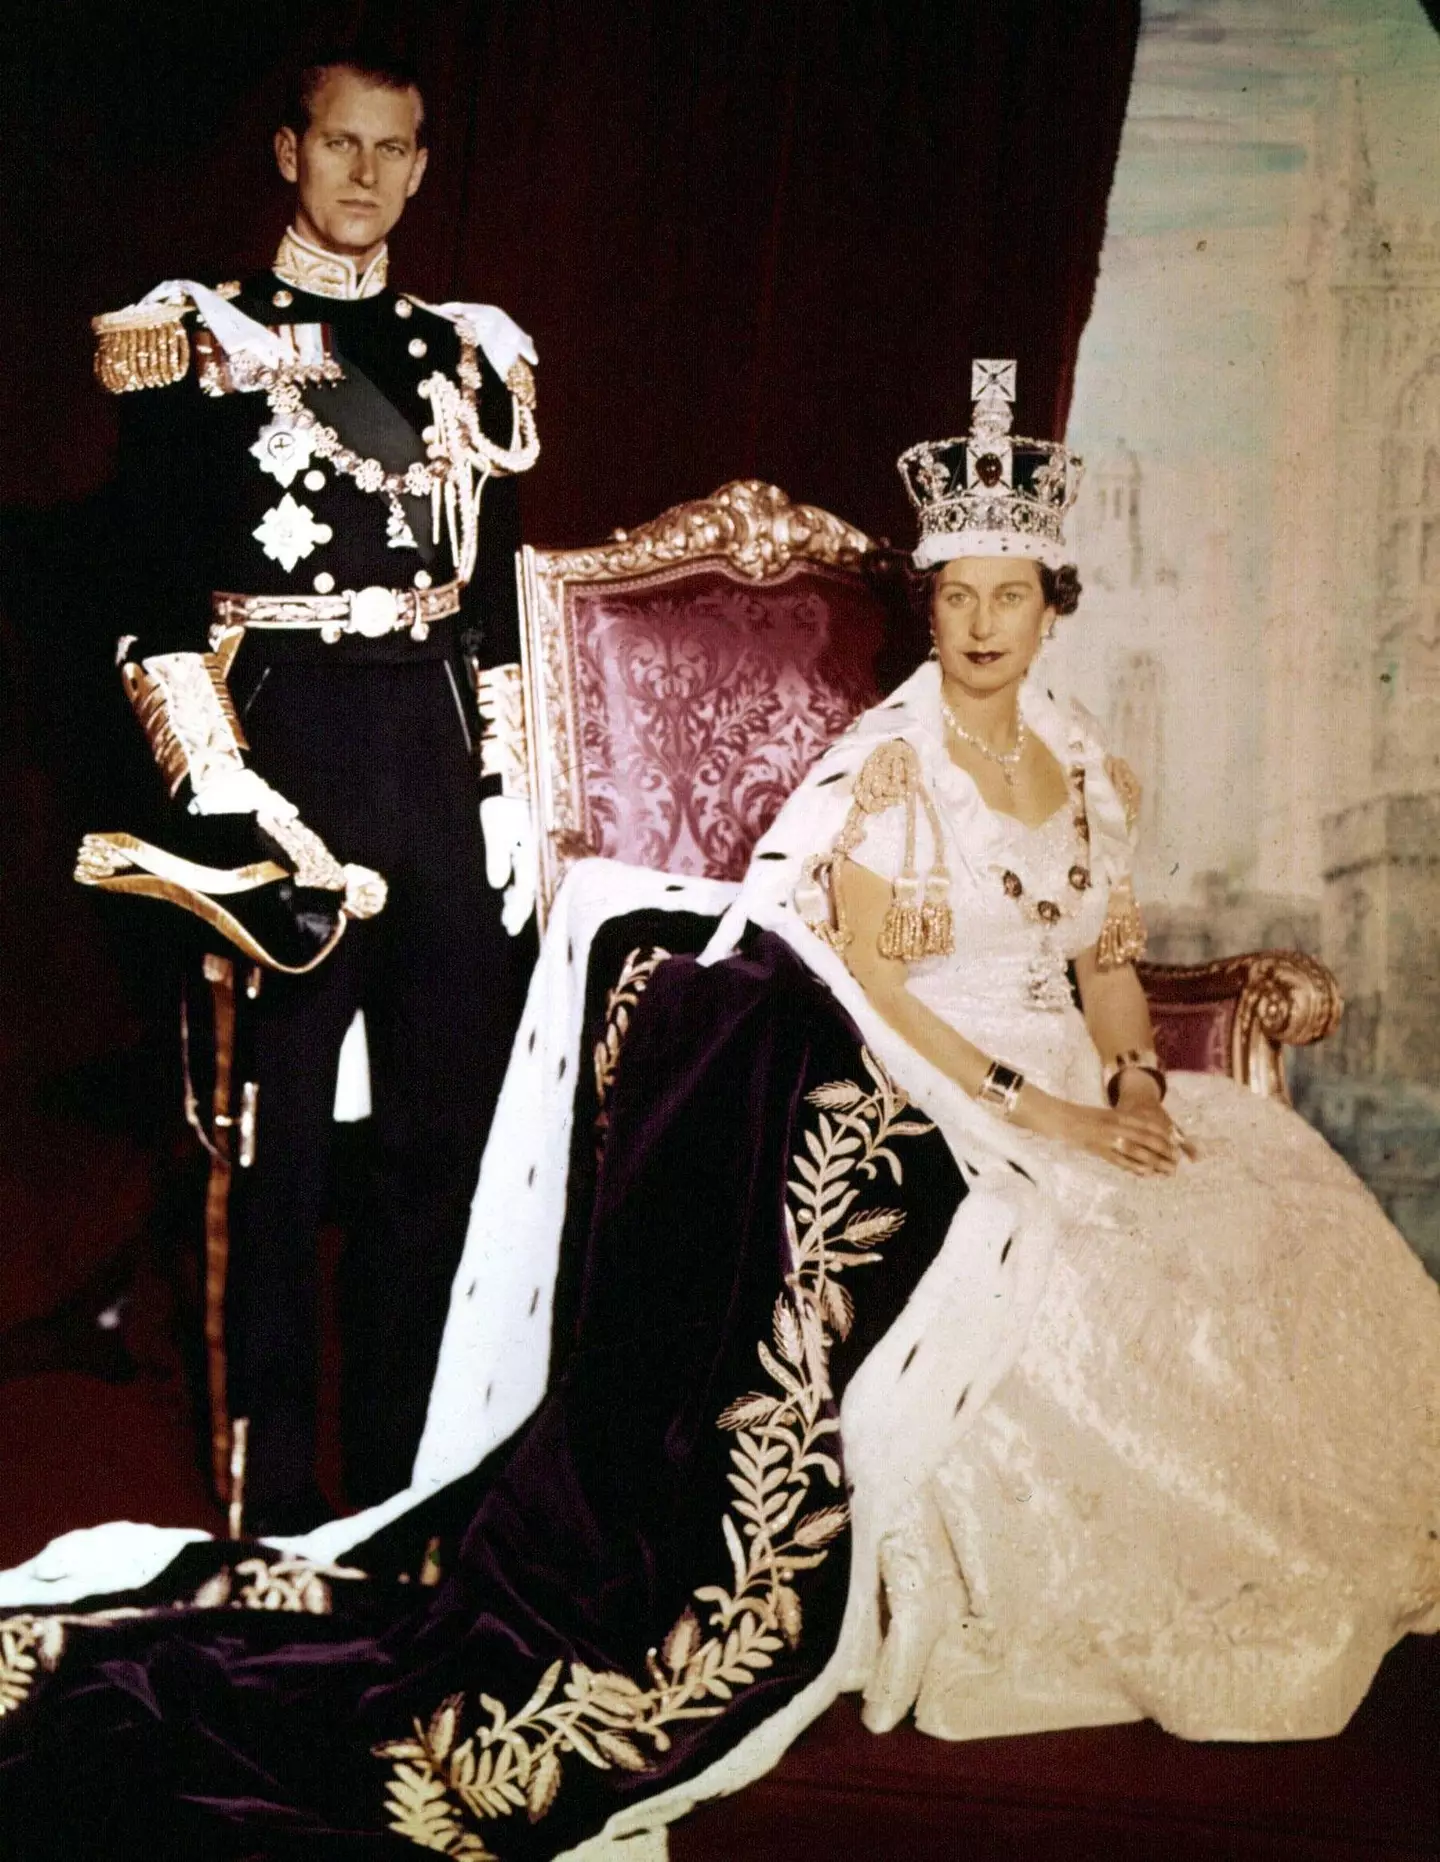 The Queen at her historical coronation.